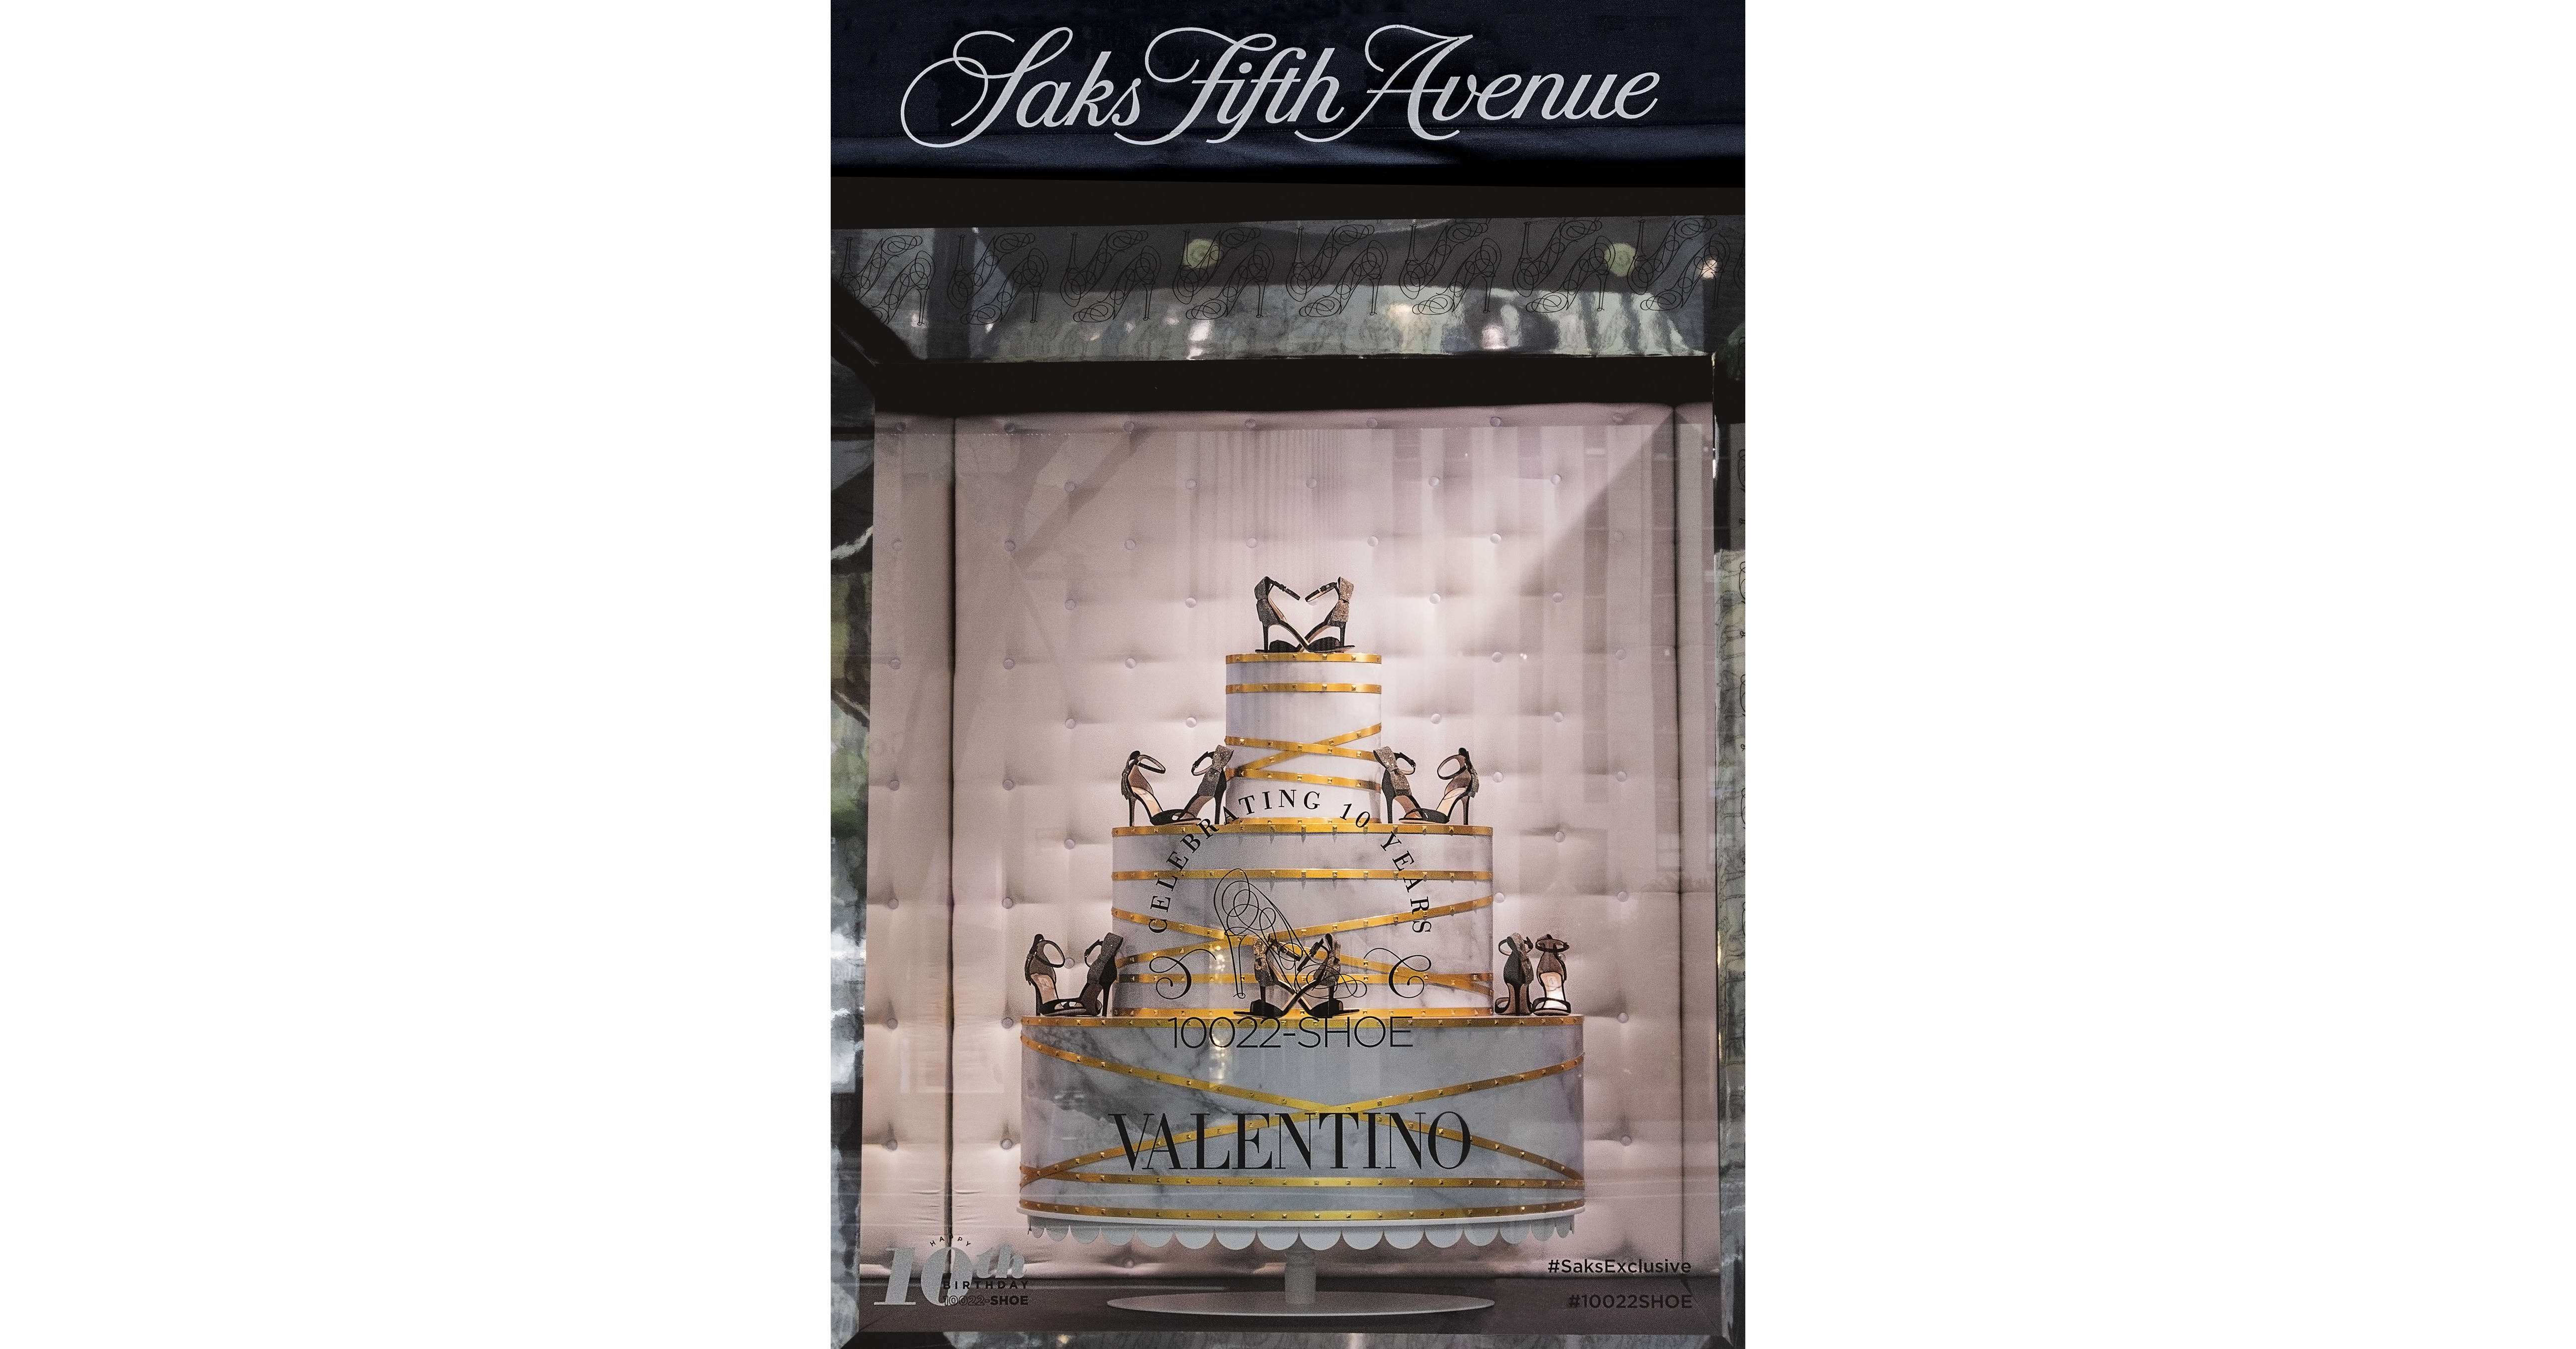 Saks Fifth Avenue's Celebration of Fashion for World Hospice Day